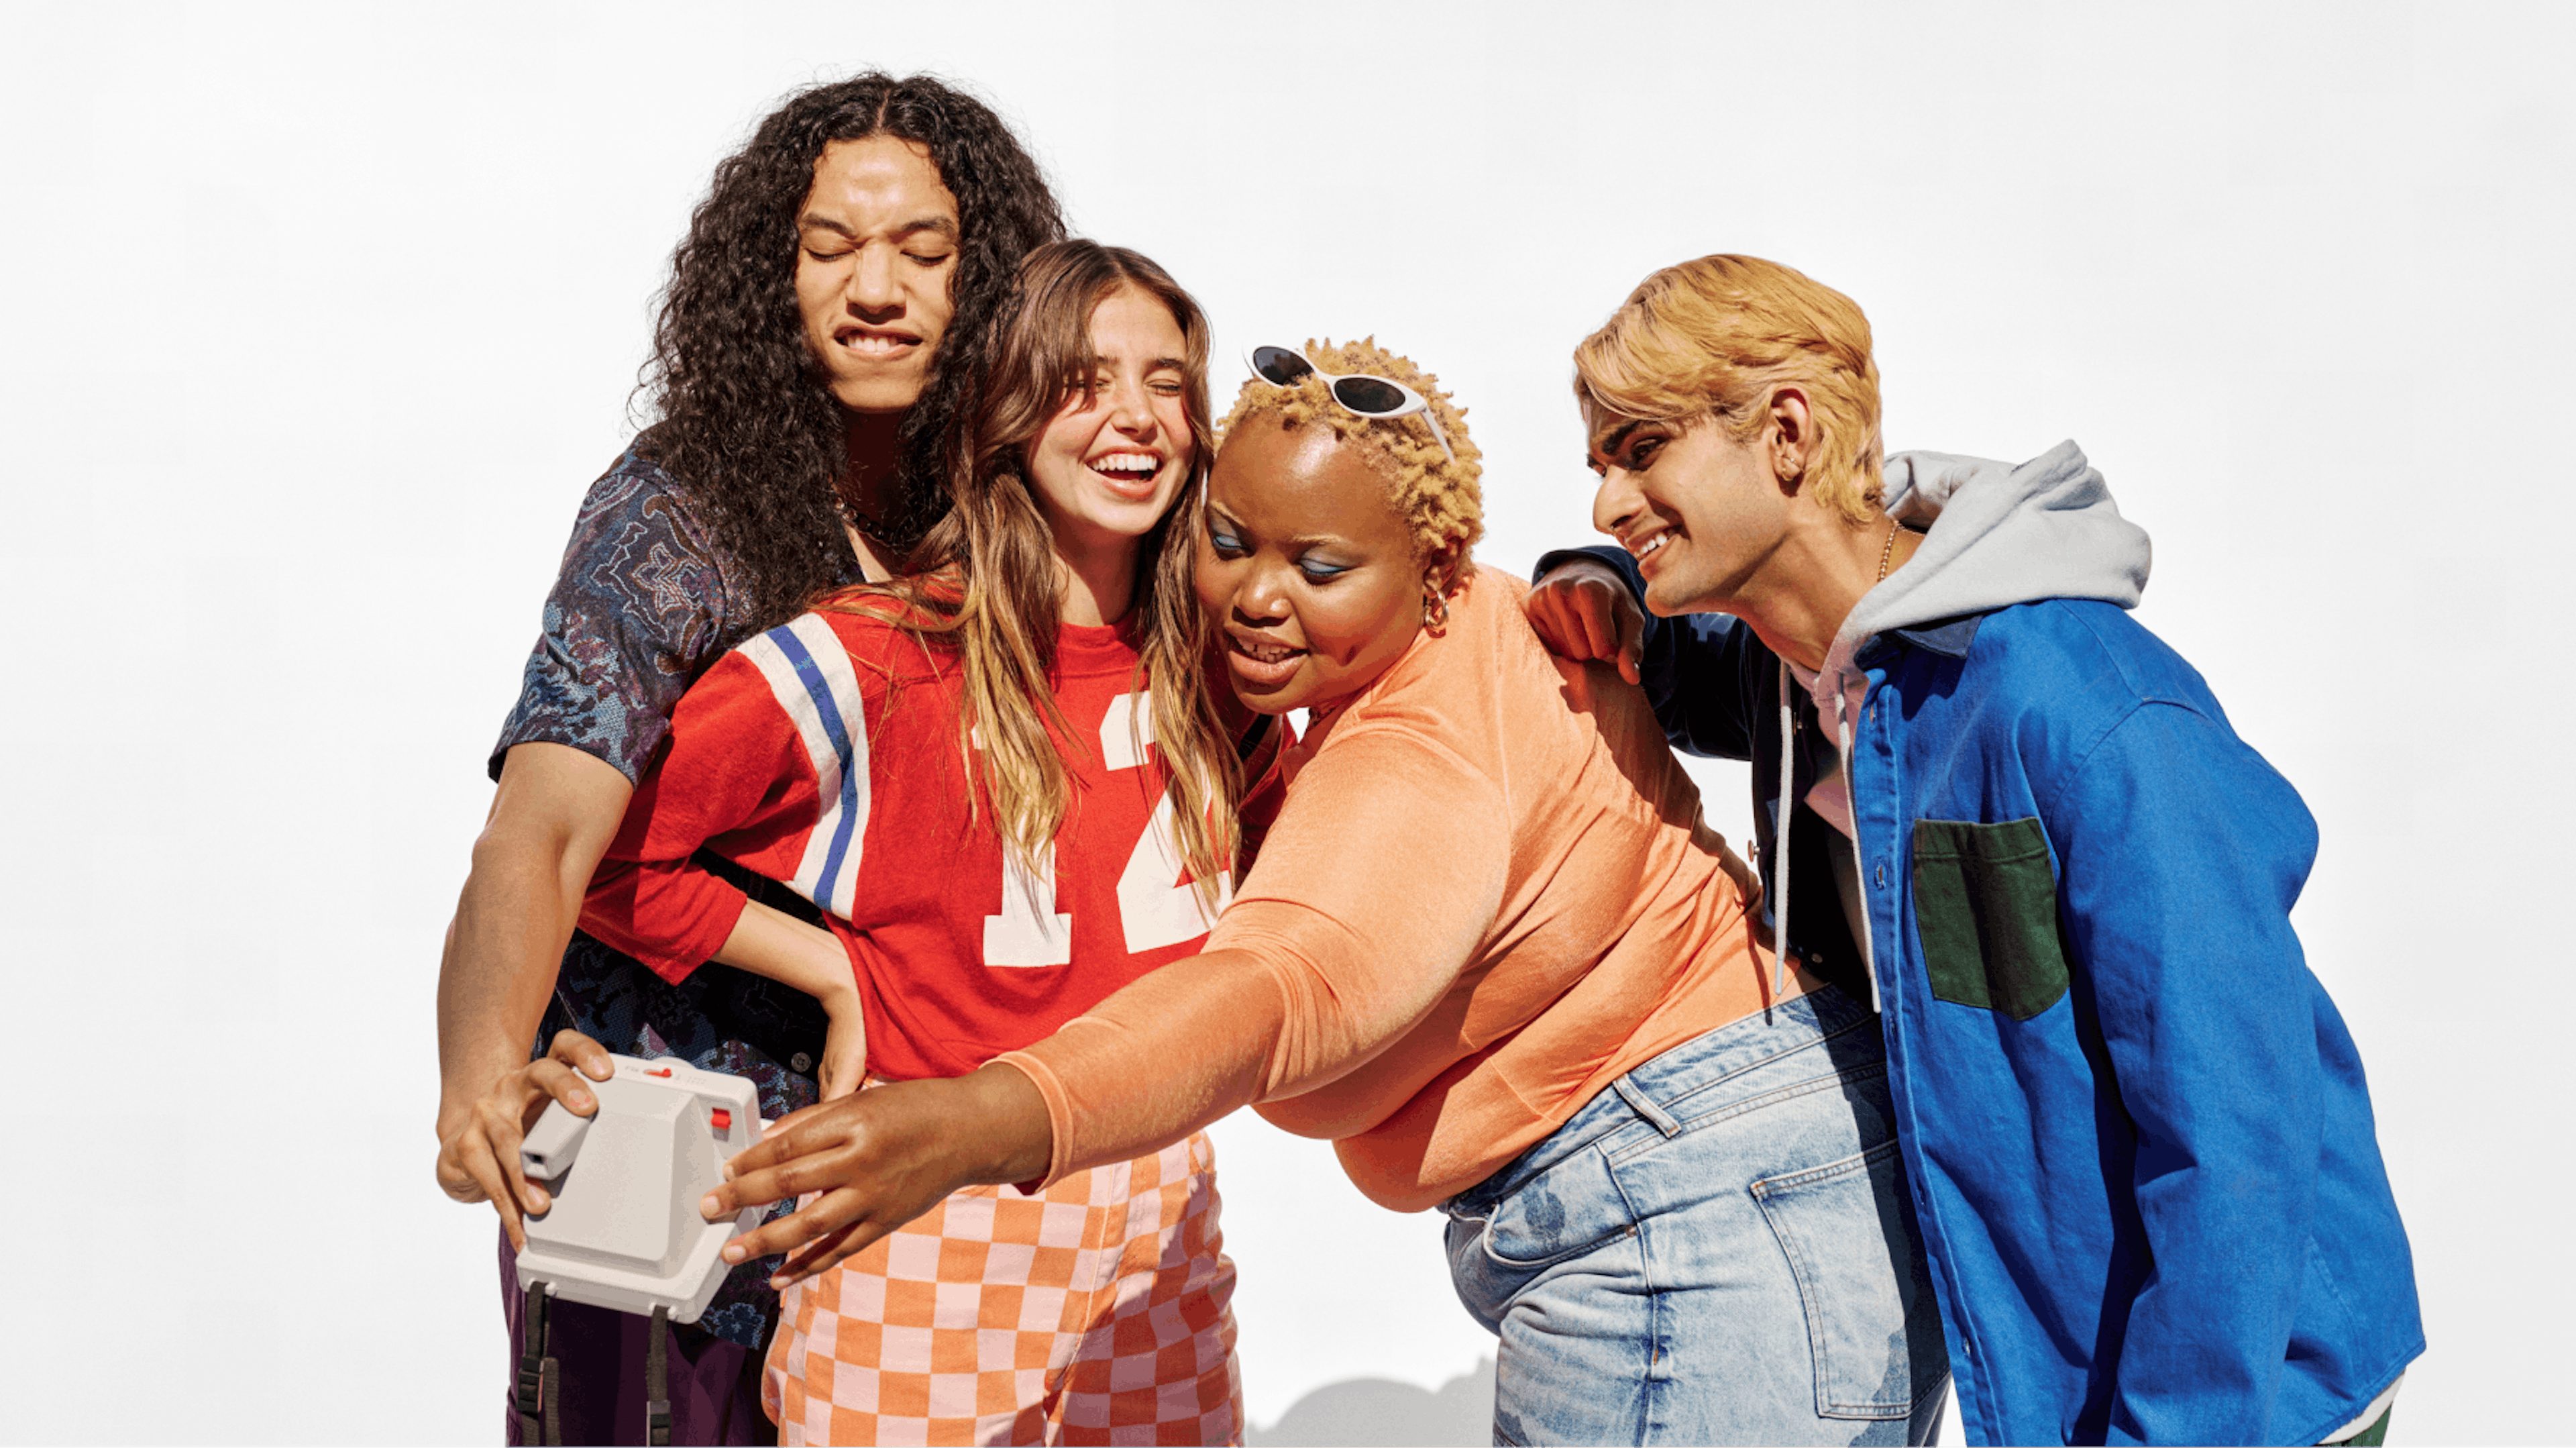 Four friends posing for a selfie, smiling and enjoying themselves in casual, colorful outfits.